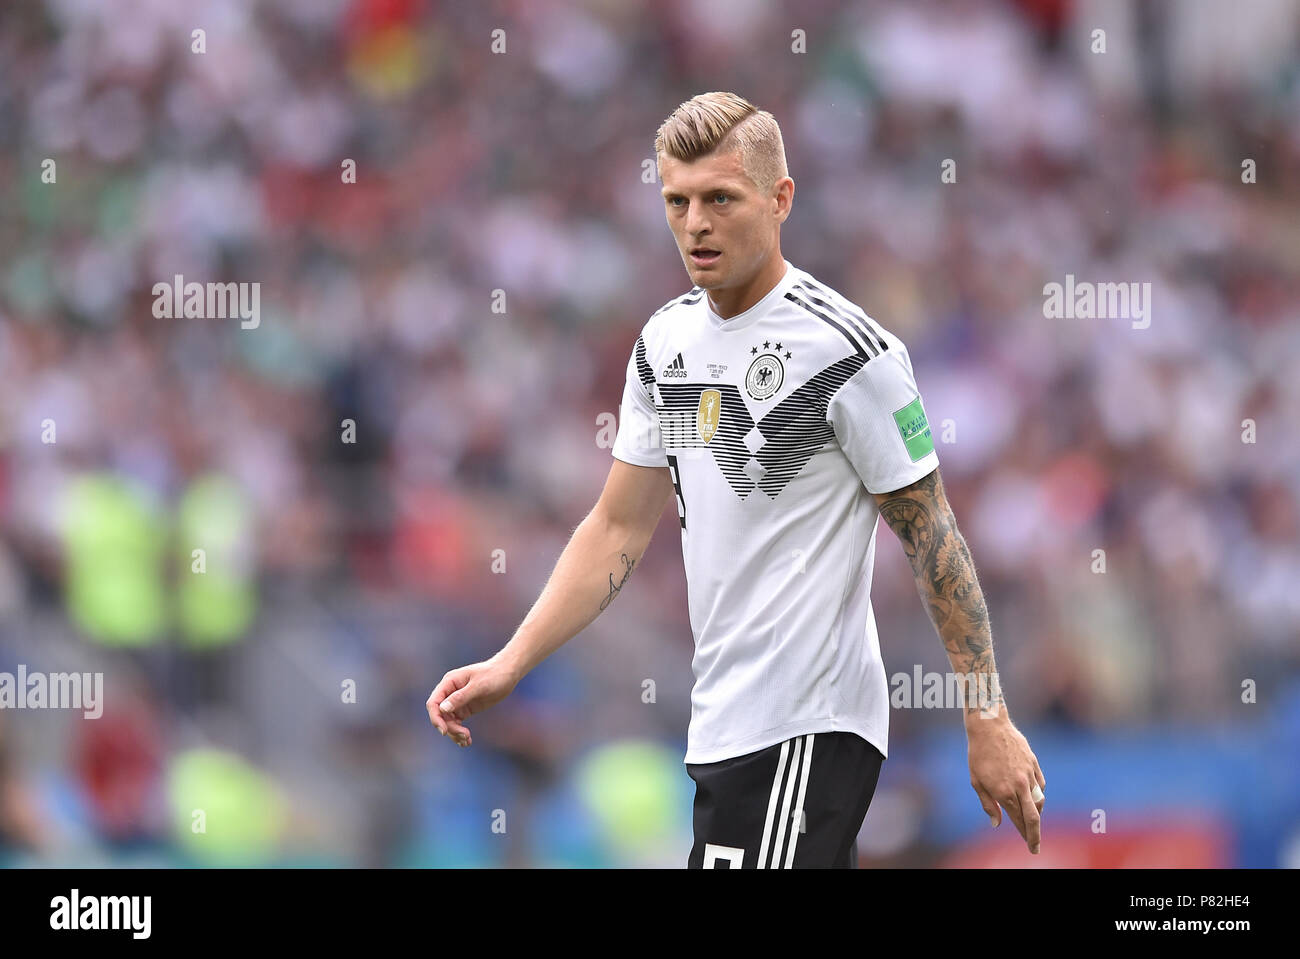 MOSCOW, RUSSIA - JUNE 17: Toni Kroos of Germany reacts during the 2018 FIFA World Cup Russia group F match between Germany and Mexico at Luzhniki Stadium on June 17, 2018 in Moscow, Russia. (Photo by Lukasz Laskowski/PressFocus/MB Media) Stock Photo